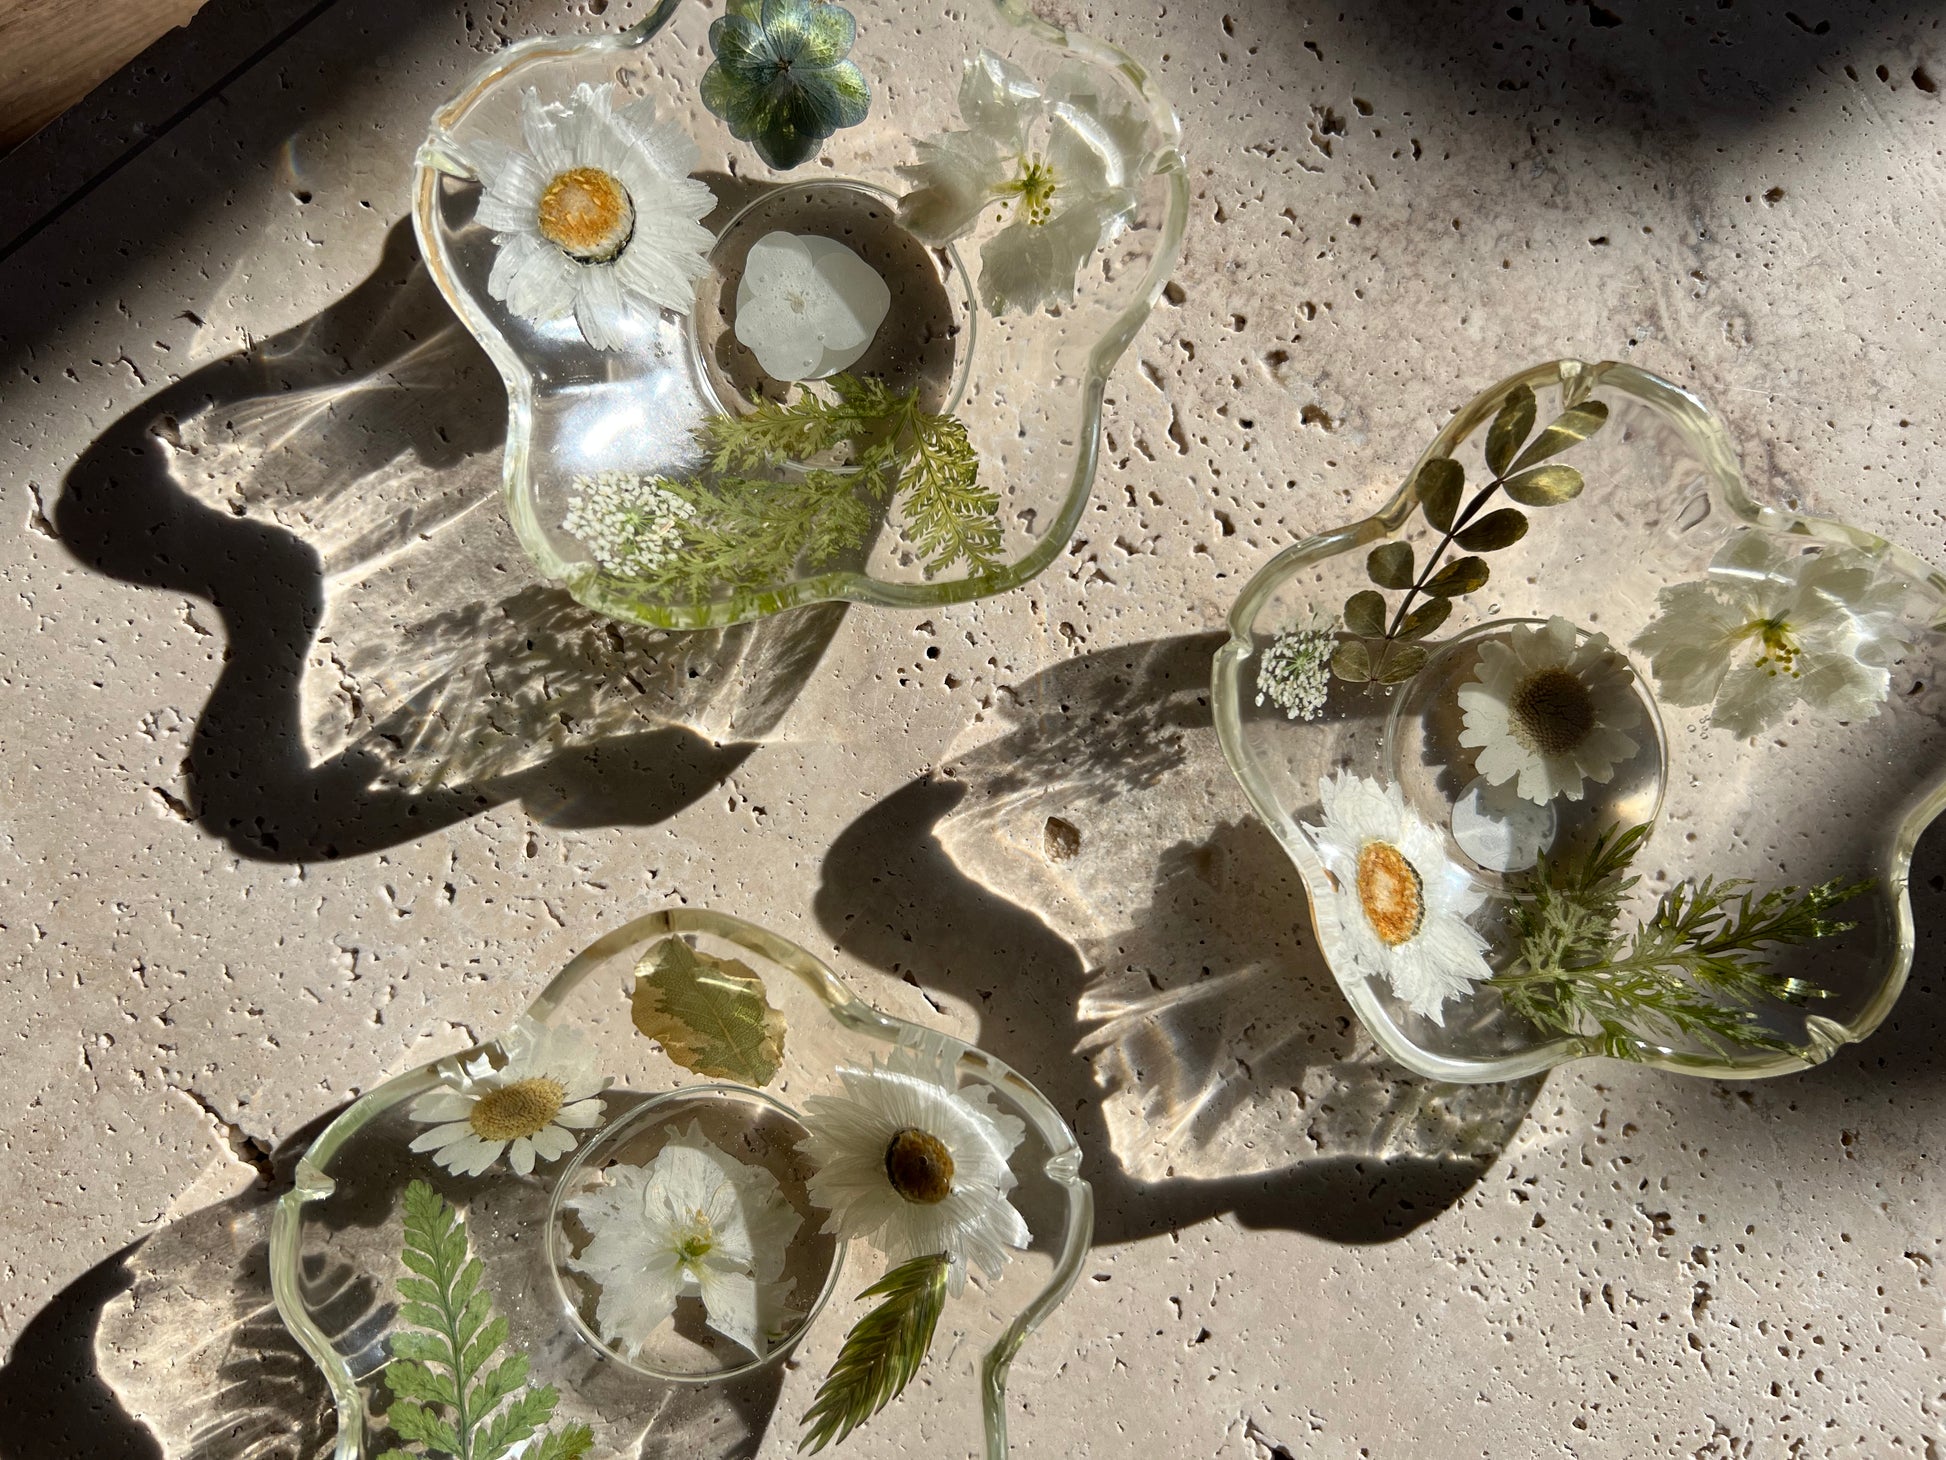 Functional art objects using hand-sourced, dried flowers encased in resin. Each piece is one of a kind and totally unique, made by hand in Lee Meszaros' home studio in Hamilton, Ontario.